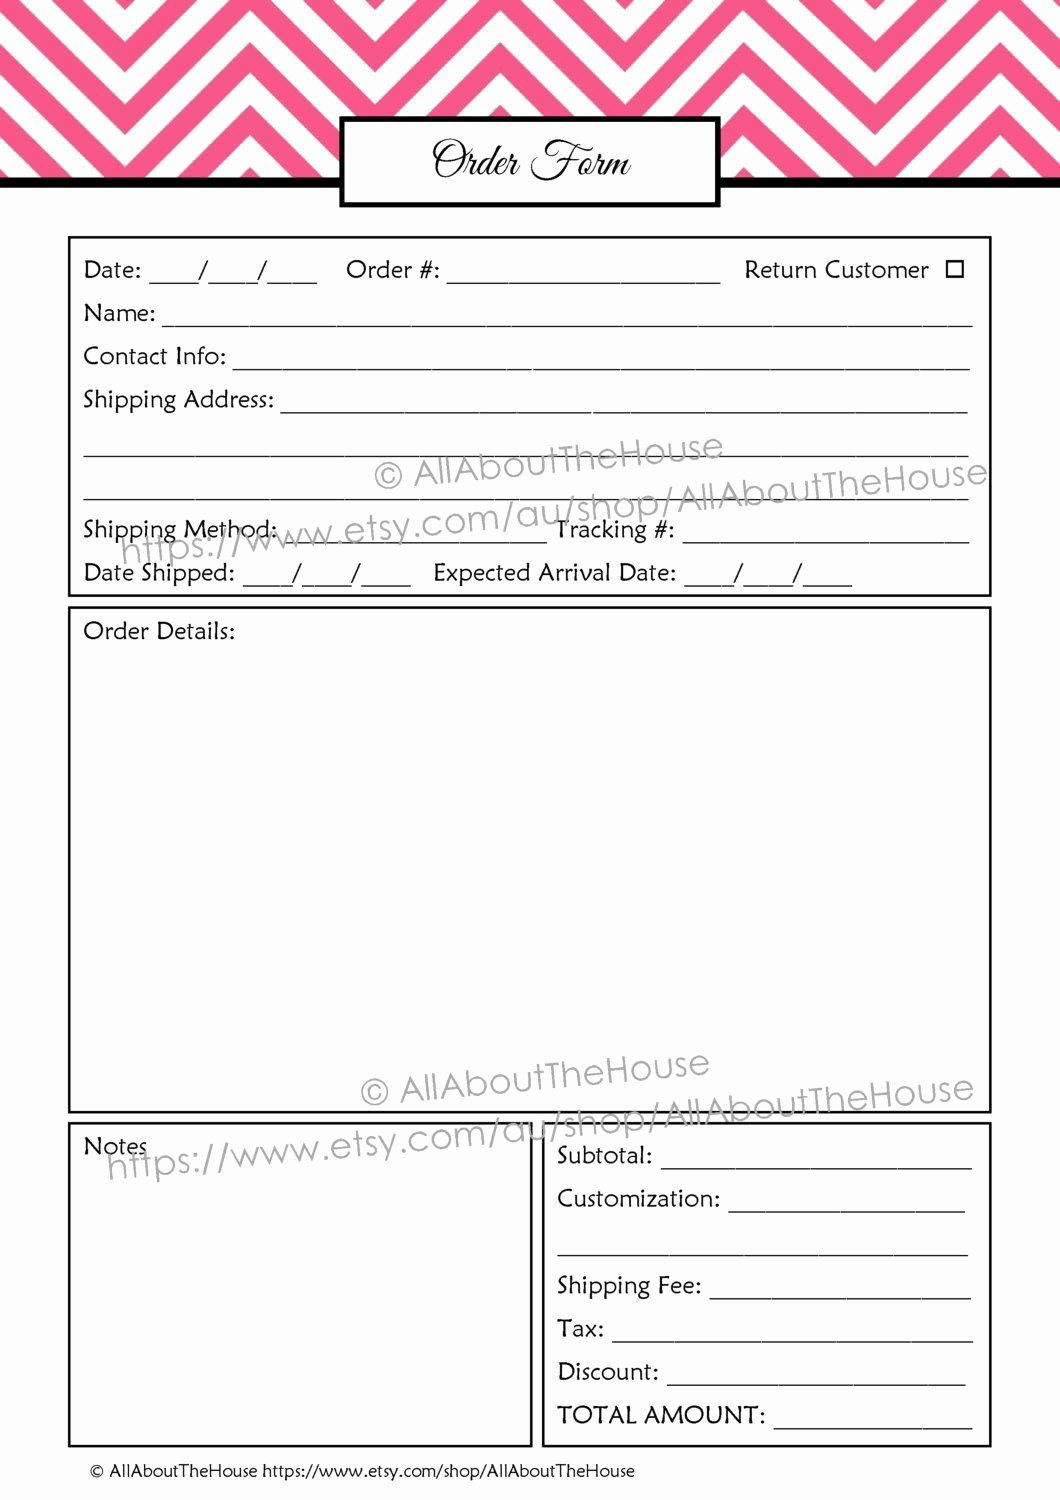 Free Craft order form Template New Best 25 order form Ideas On Pinterest